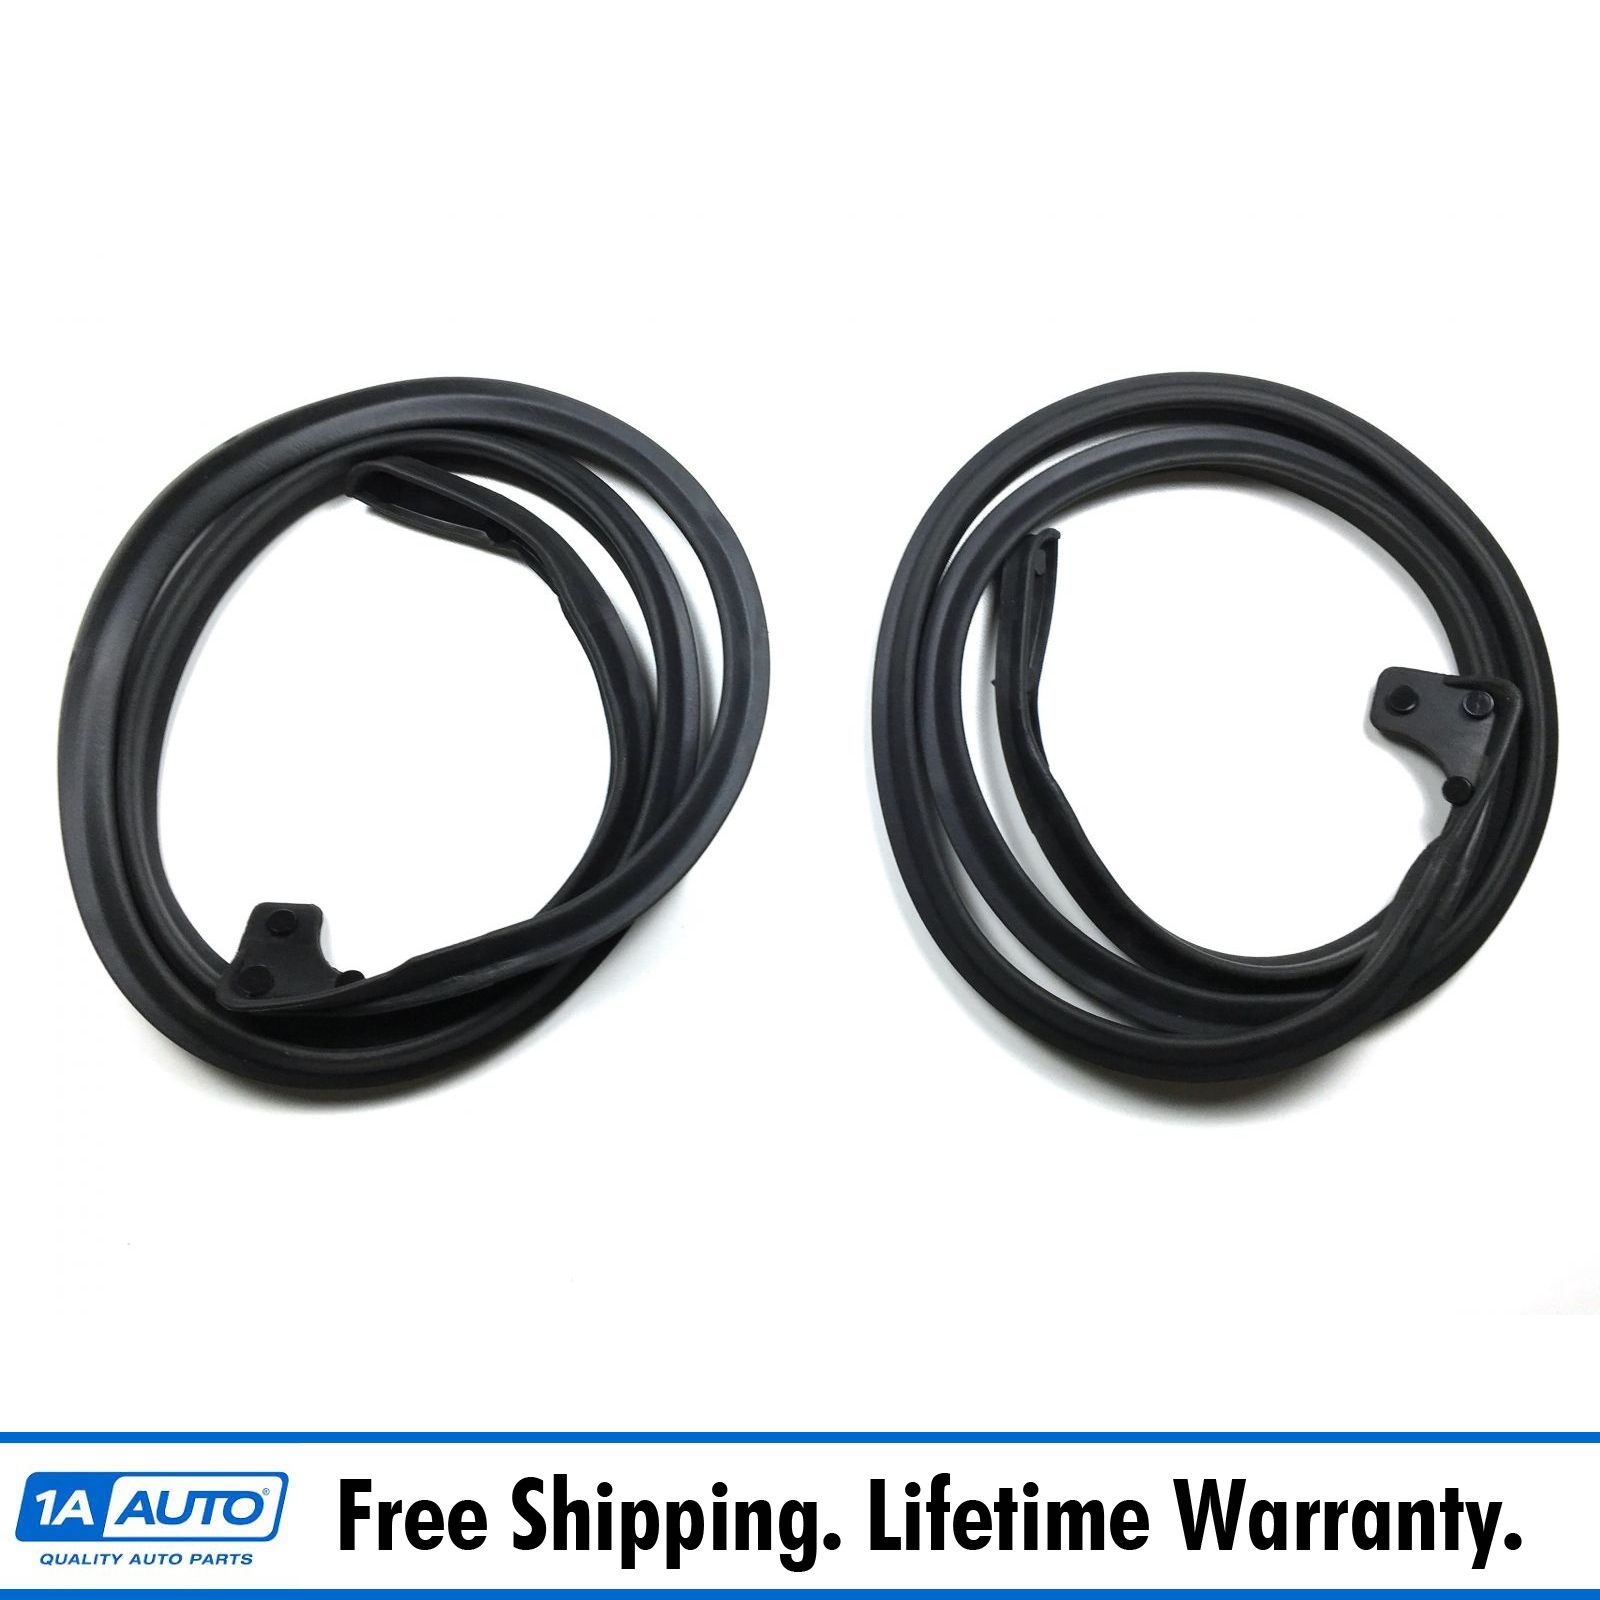 Door Weatherstrip Seal Lower Kit Pair Set of 2 for Jeep Commando Jeepster New